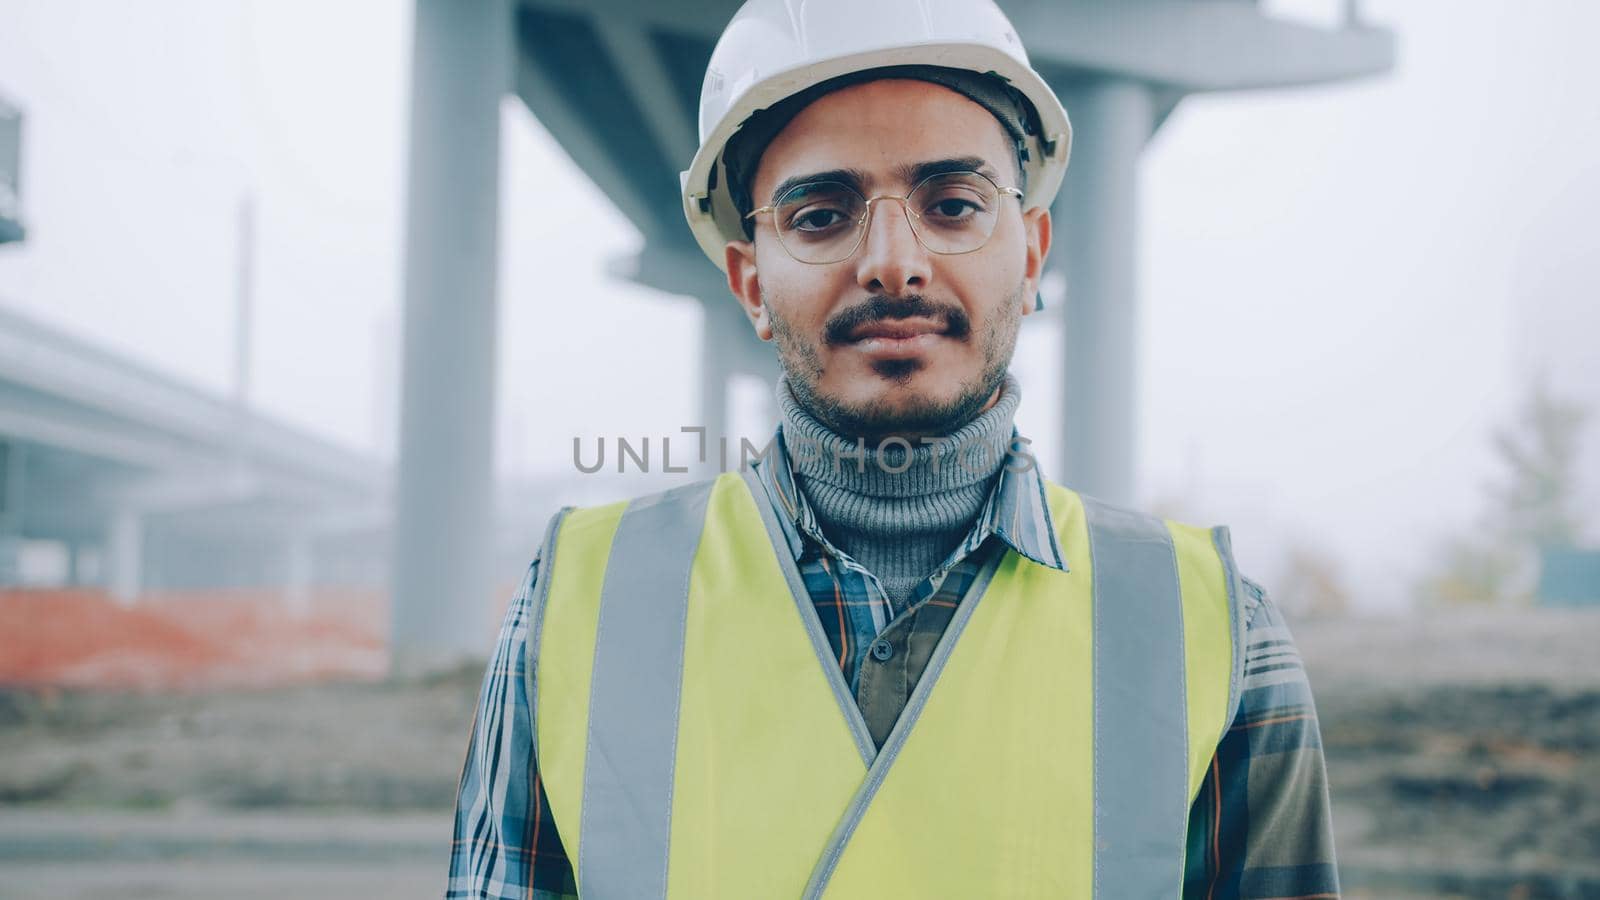 Portrait of Middle Eastern builder wearing uniform standing outdoors in building site and looking at camera. Profession and specialists concept.